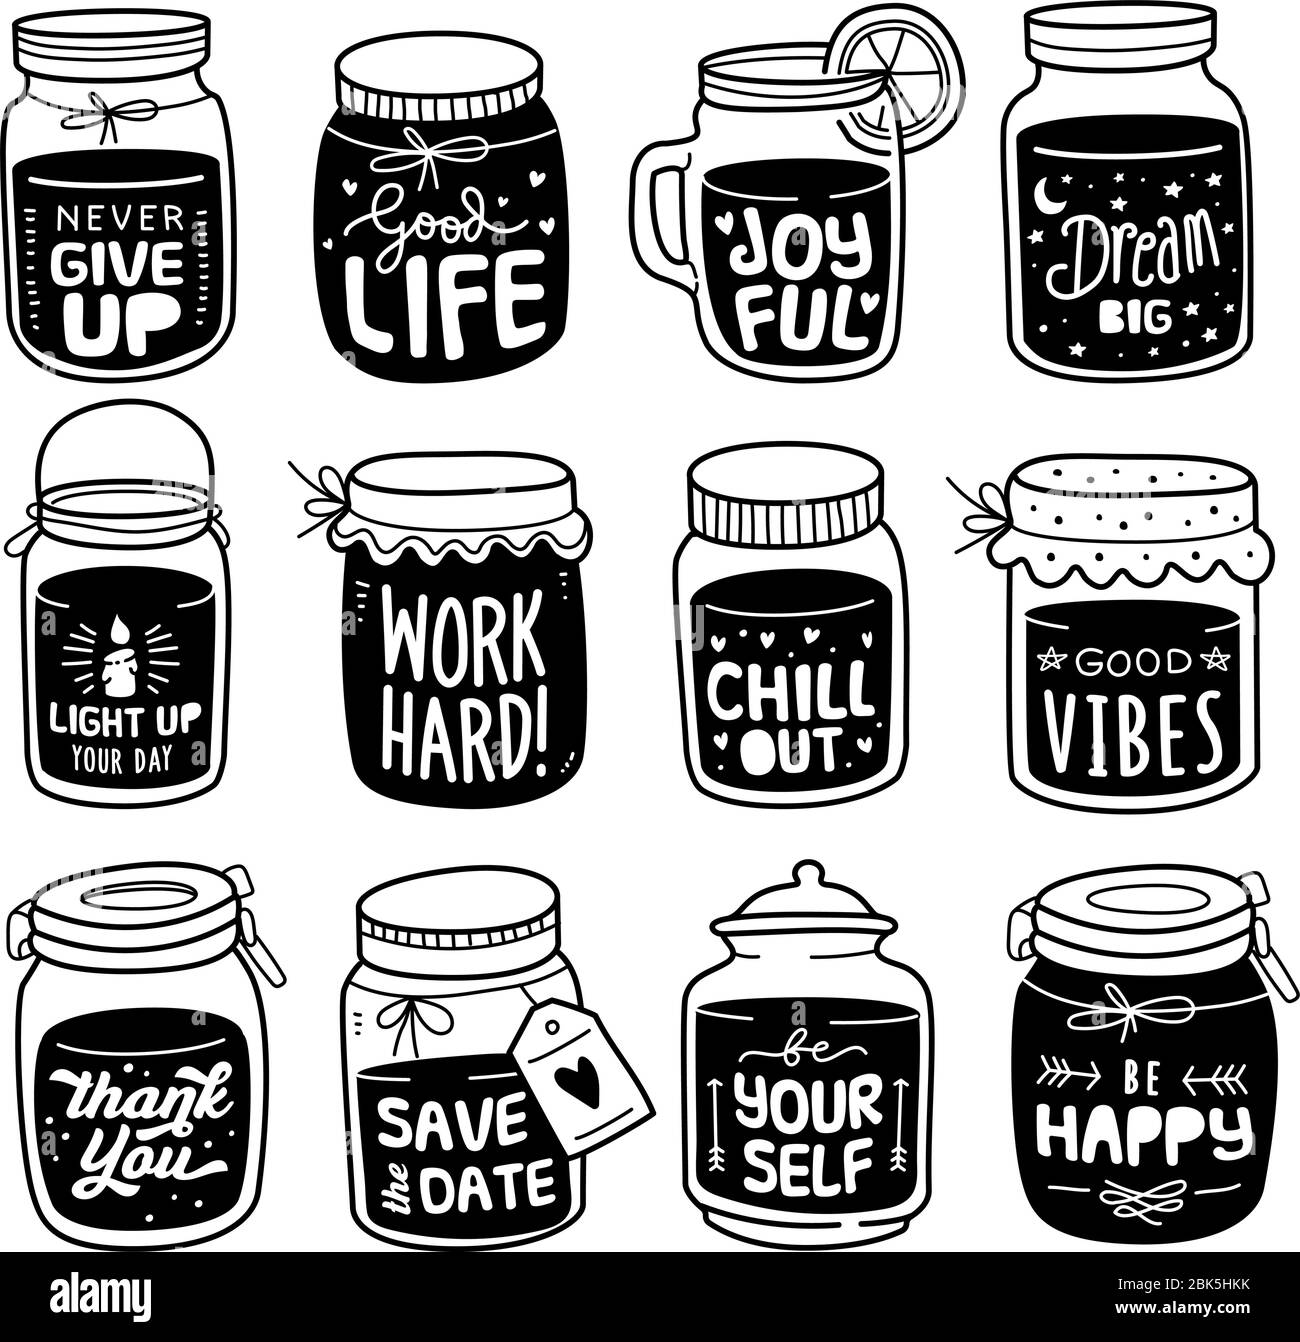 Set of vector doodle element  of inspirational short phrase quotes. Set of positive lifestyle quote labels written on jars. Stock Vector